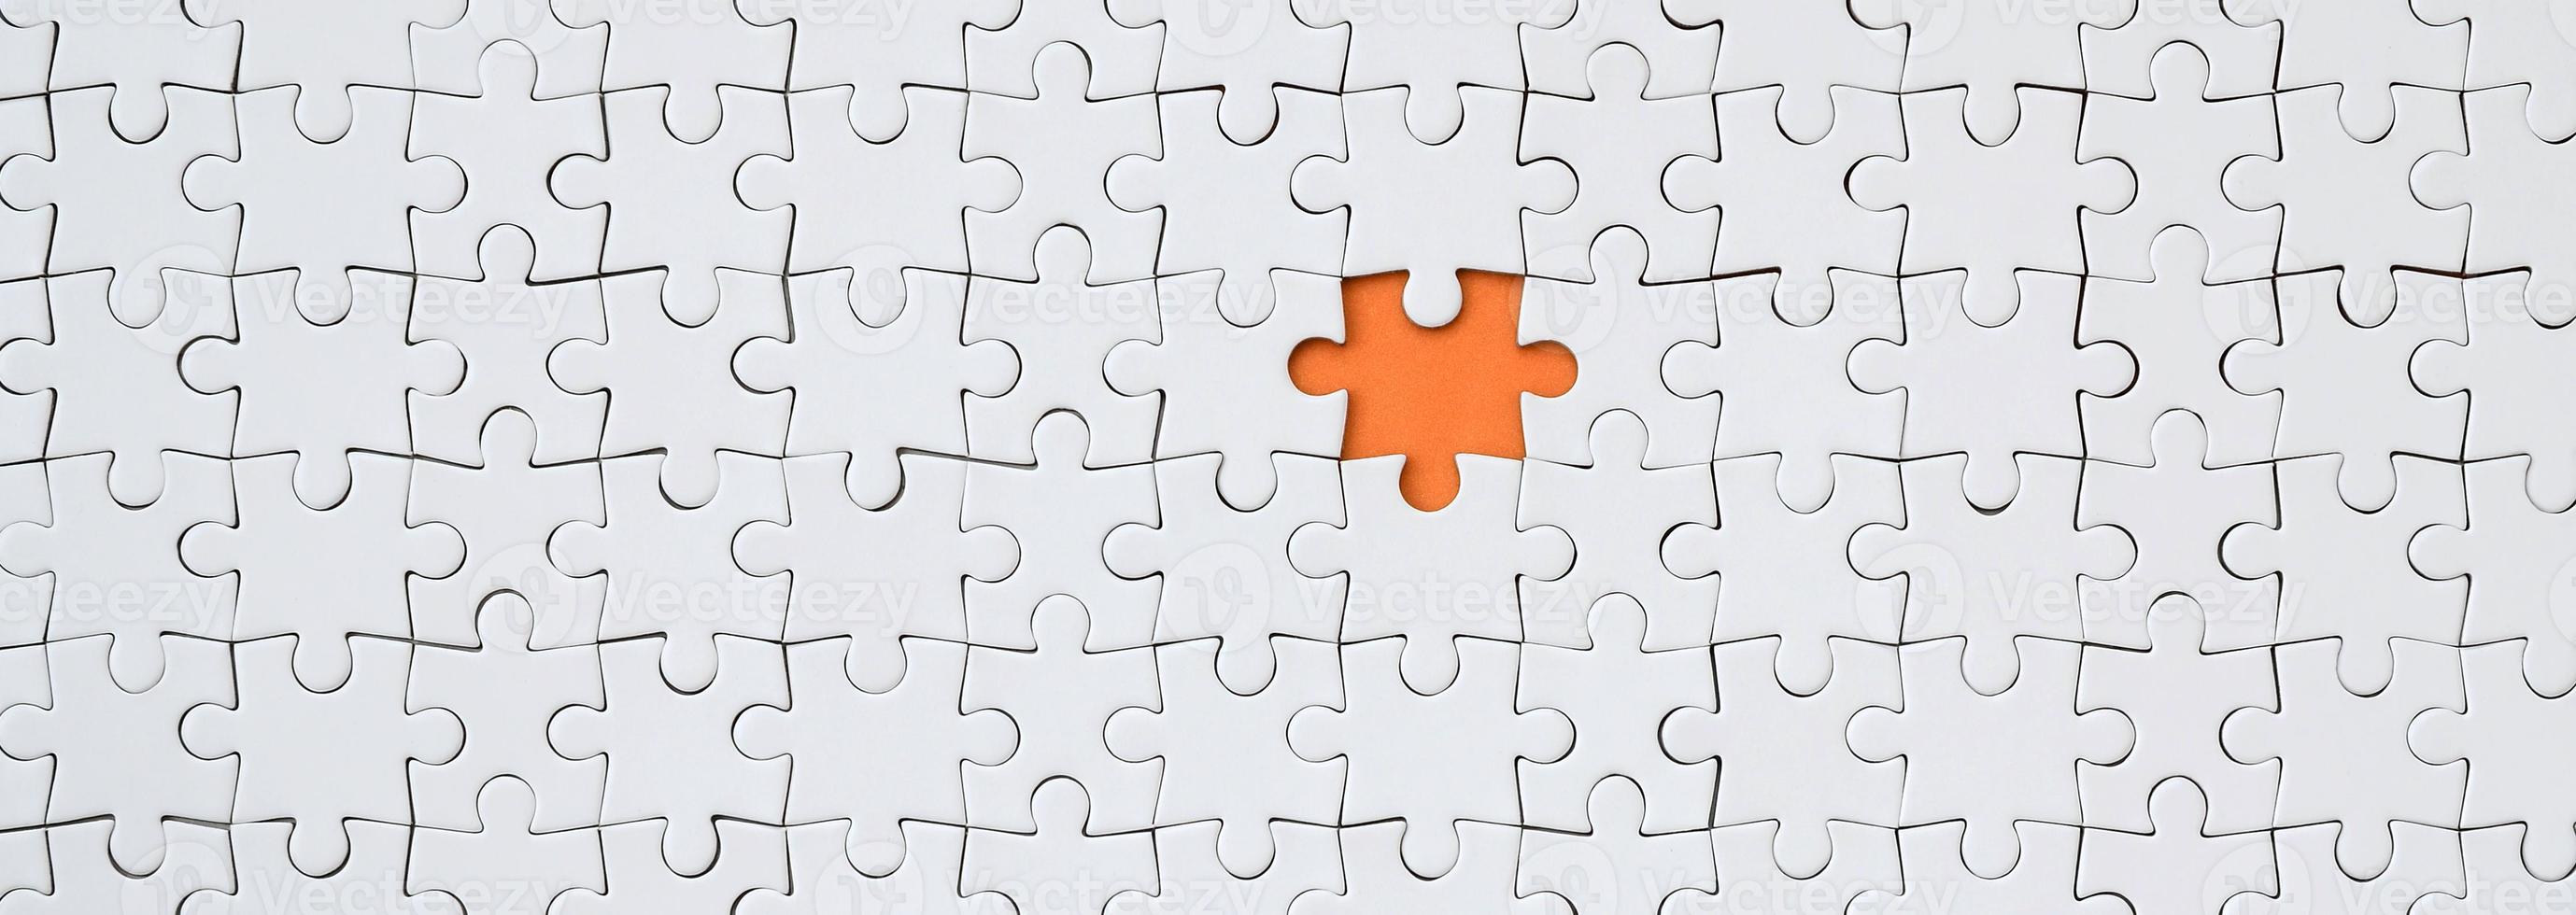 The texture of a white jigsaw puzzle in an assembled state with one missing element forming an orange space photo